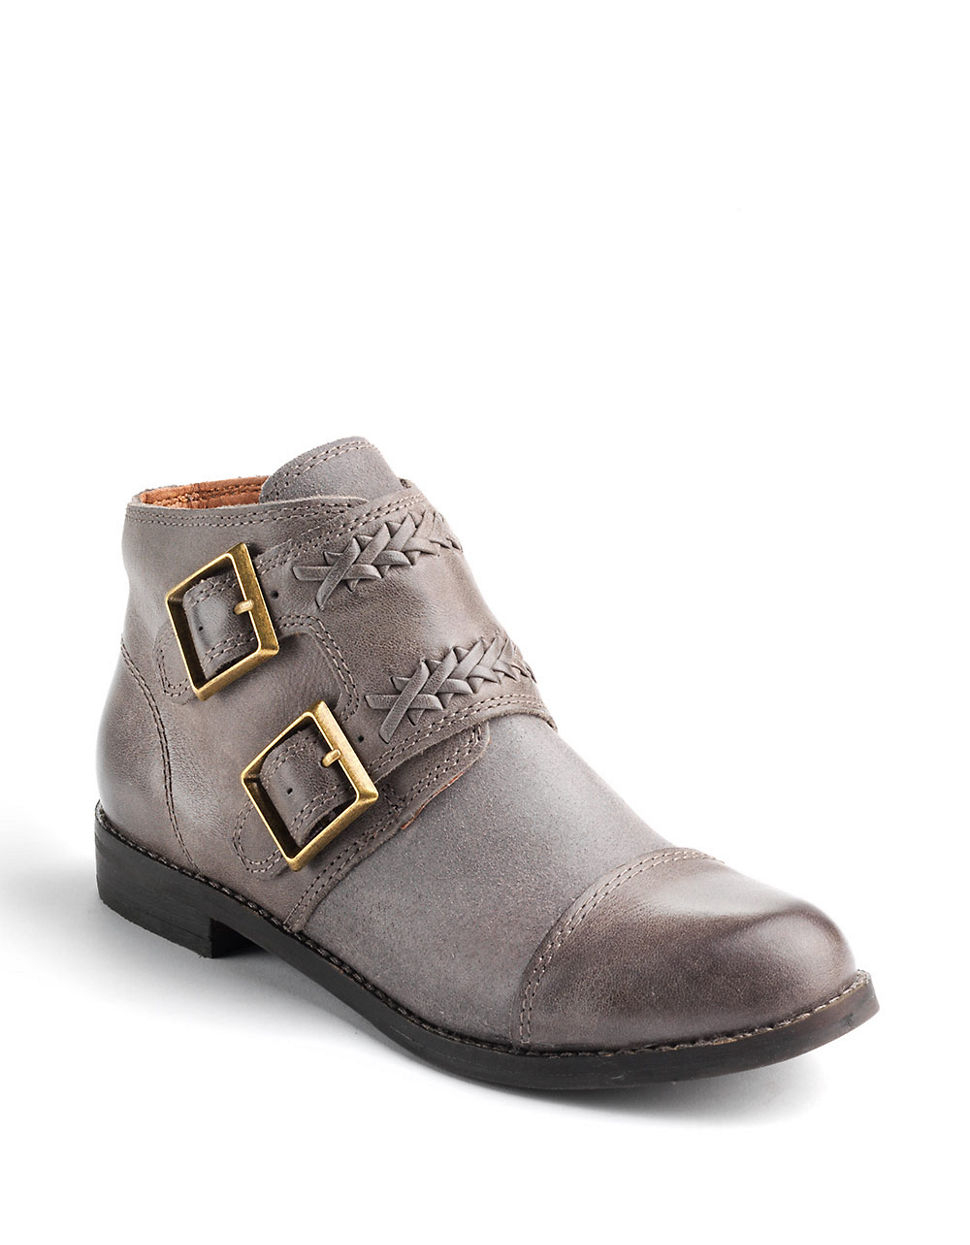 Lyst - Lucky Brand Daker Ankle Boots in Gray